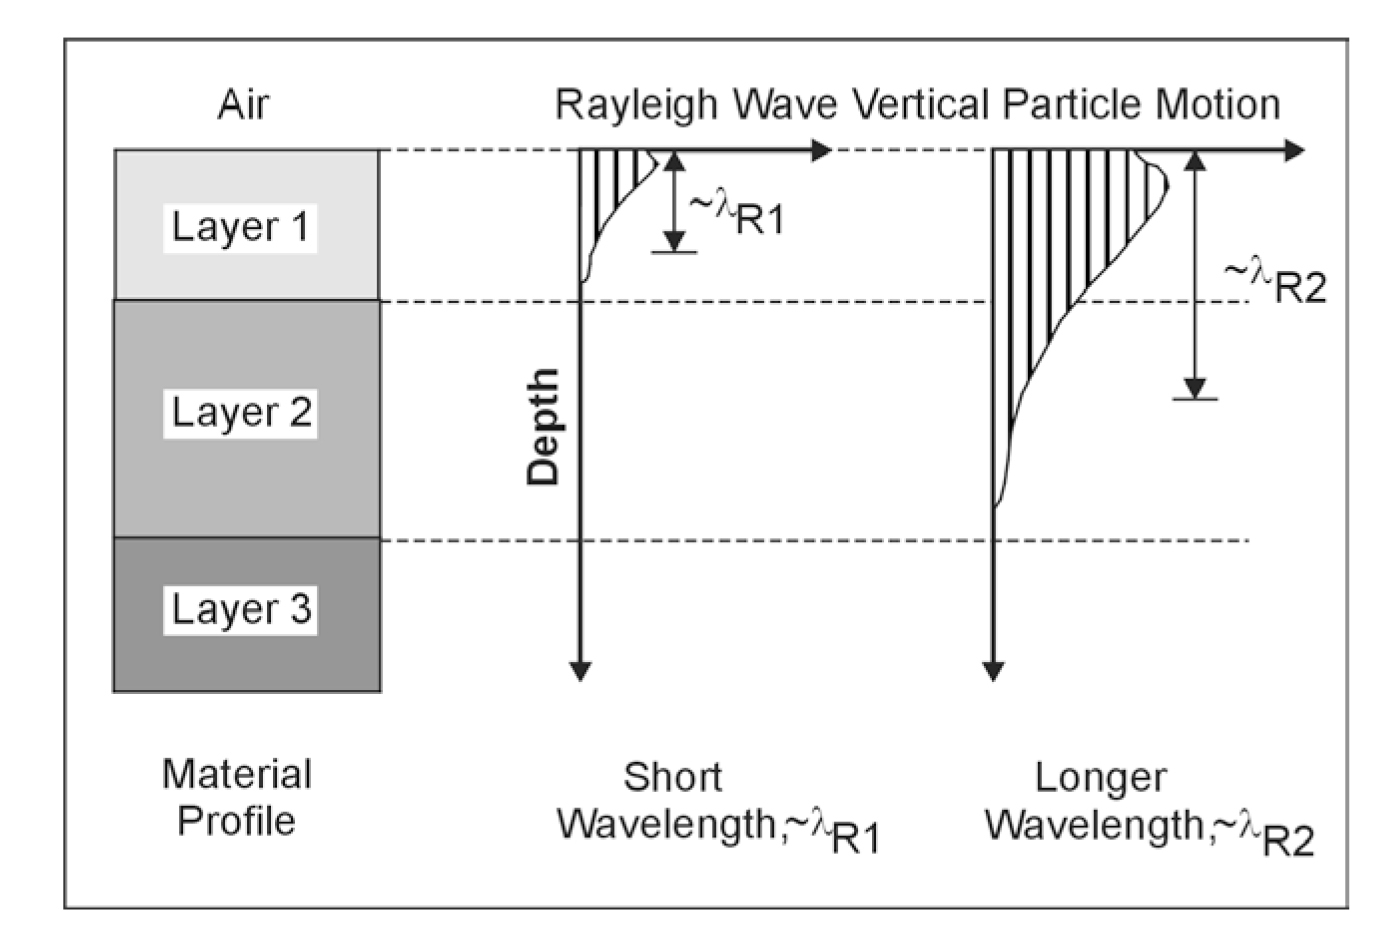 Schematic showing variation of Rayleigh wave particle motion with depth.